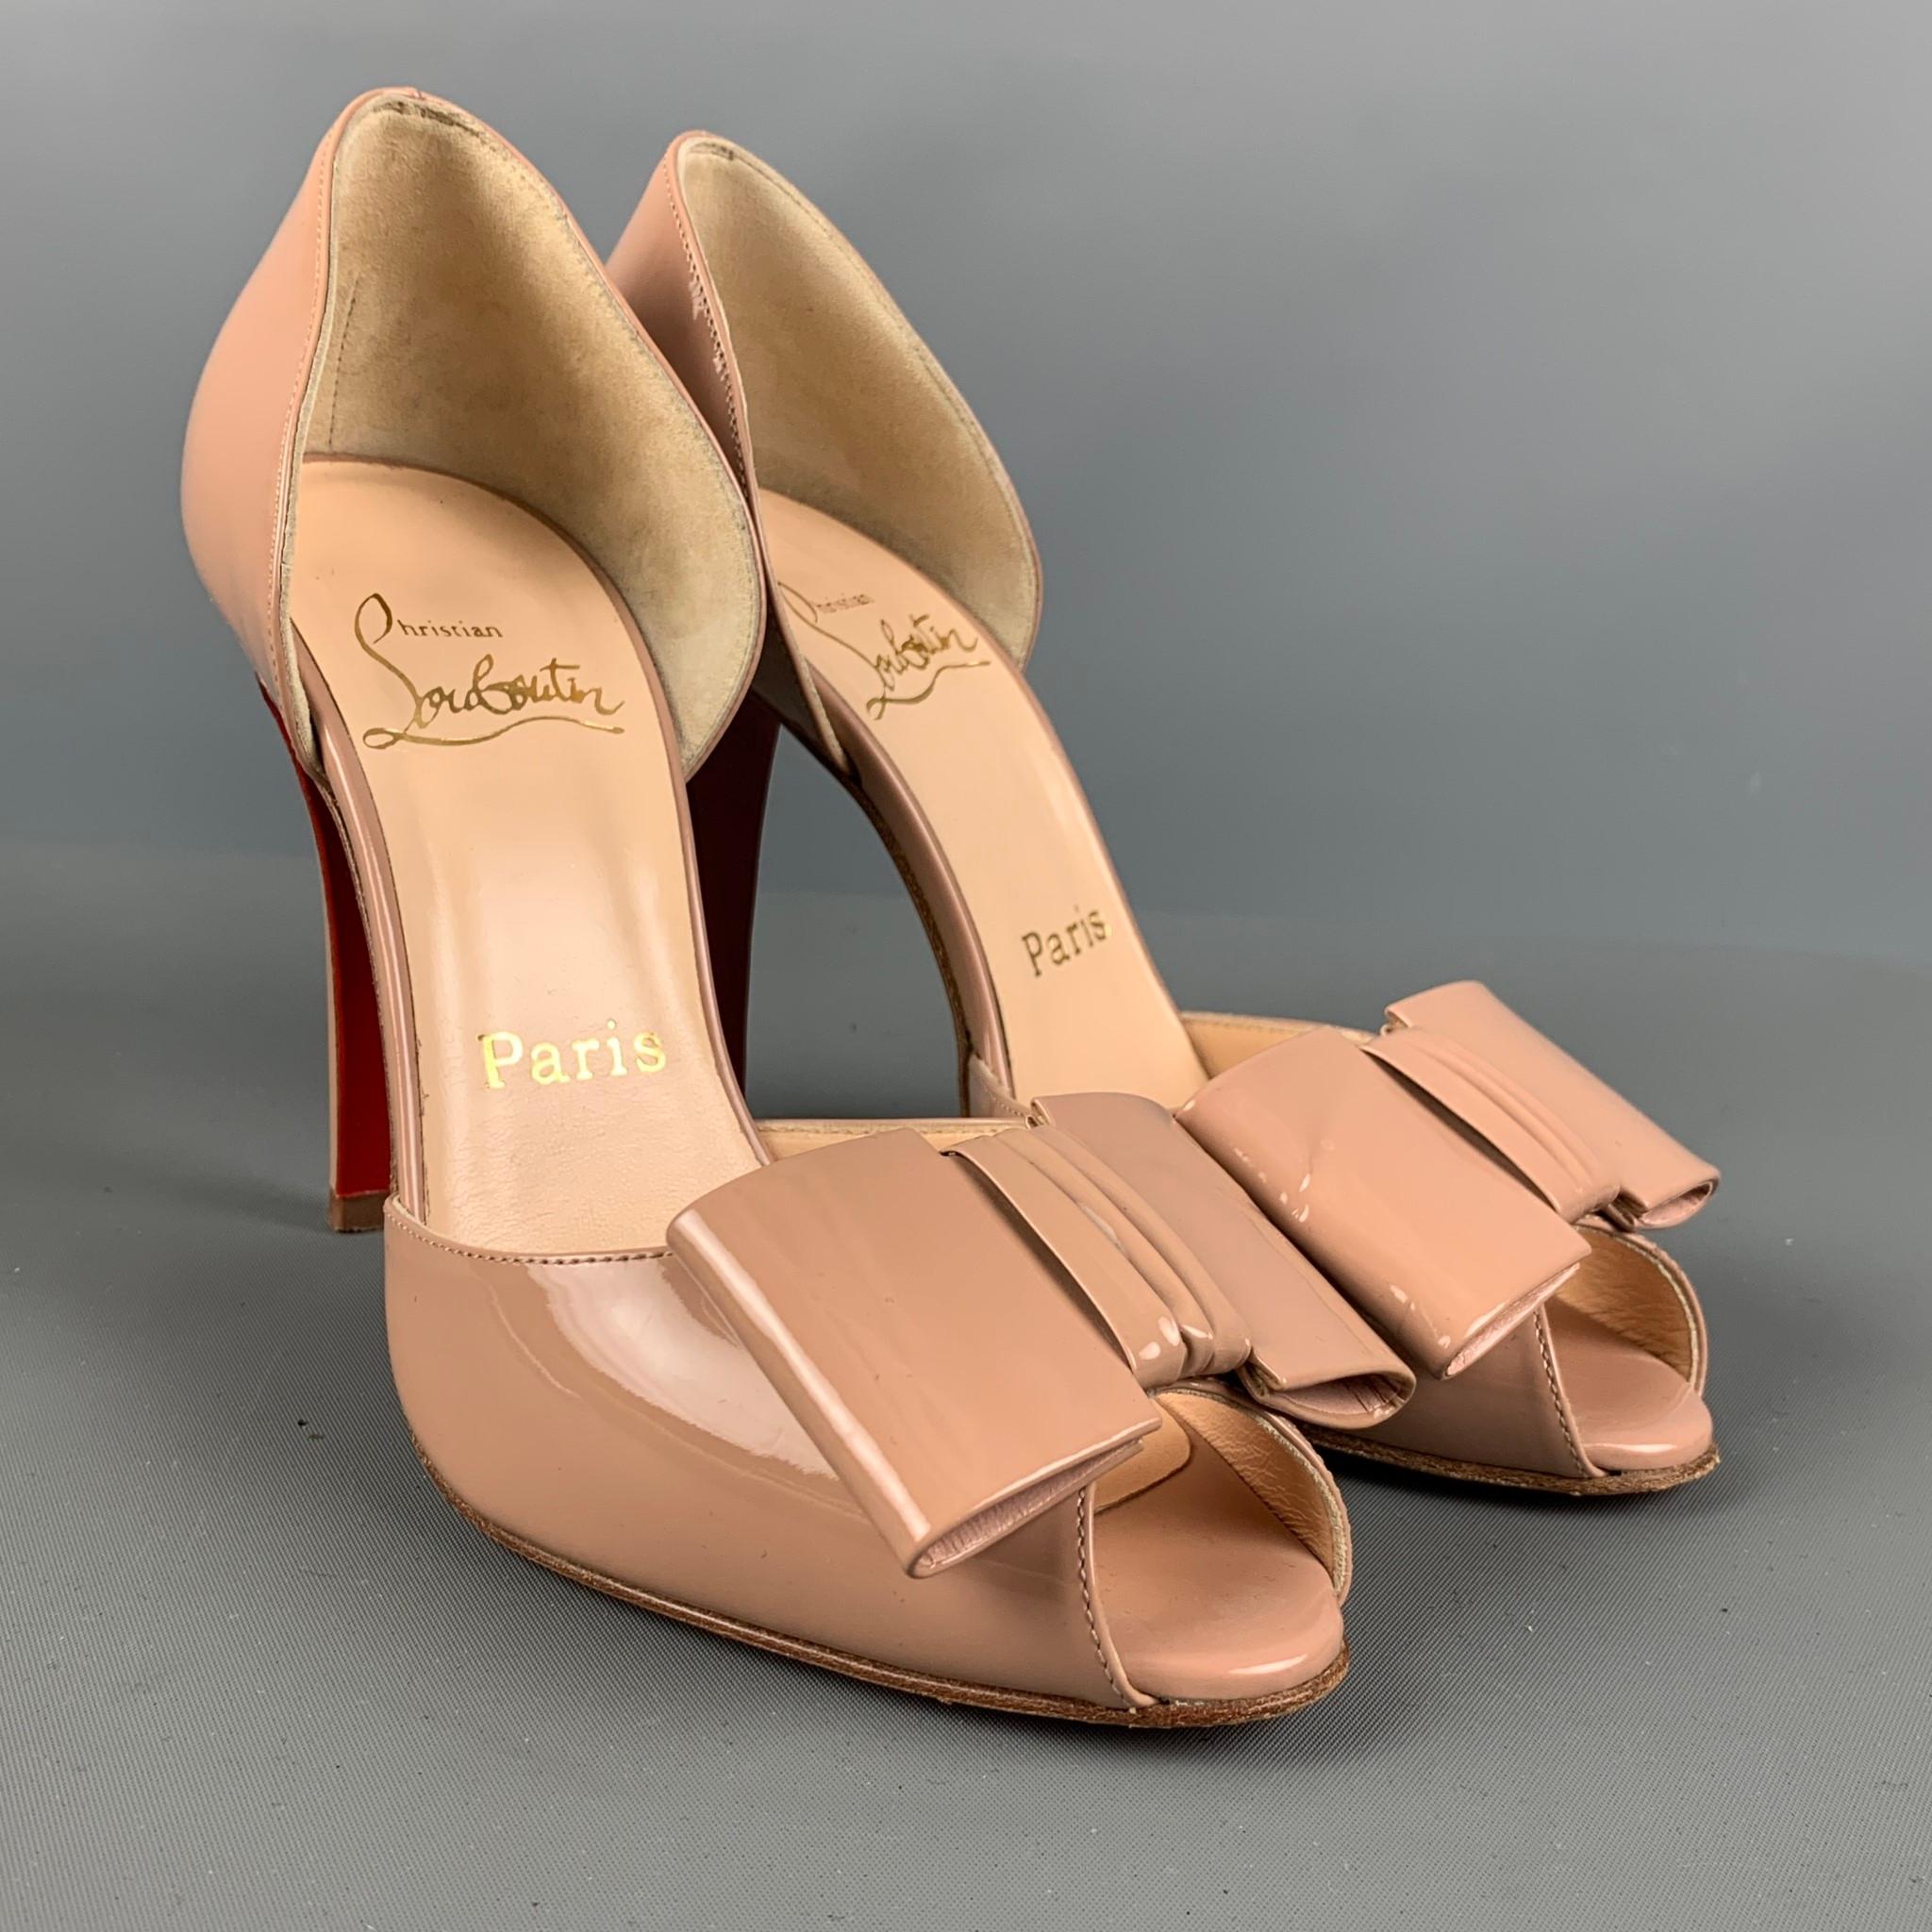 CHRISTIAN LOUBOUTIN pumps comes in a beige patent leather featuring an open toe, signature red sole, bow detail, and a stiletto heel. Made in Italy.

Very Good Pre-Owned Condition.
Marked: 36

Measurements:

Heel: 4.5 in.

 

SKU: 124368
Category: